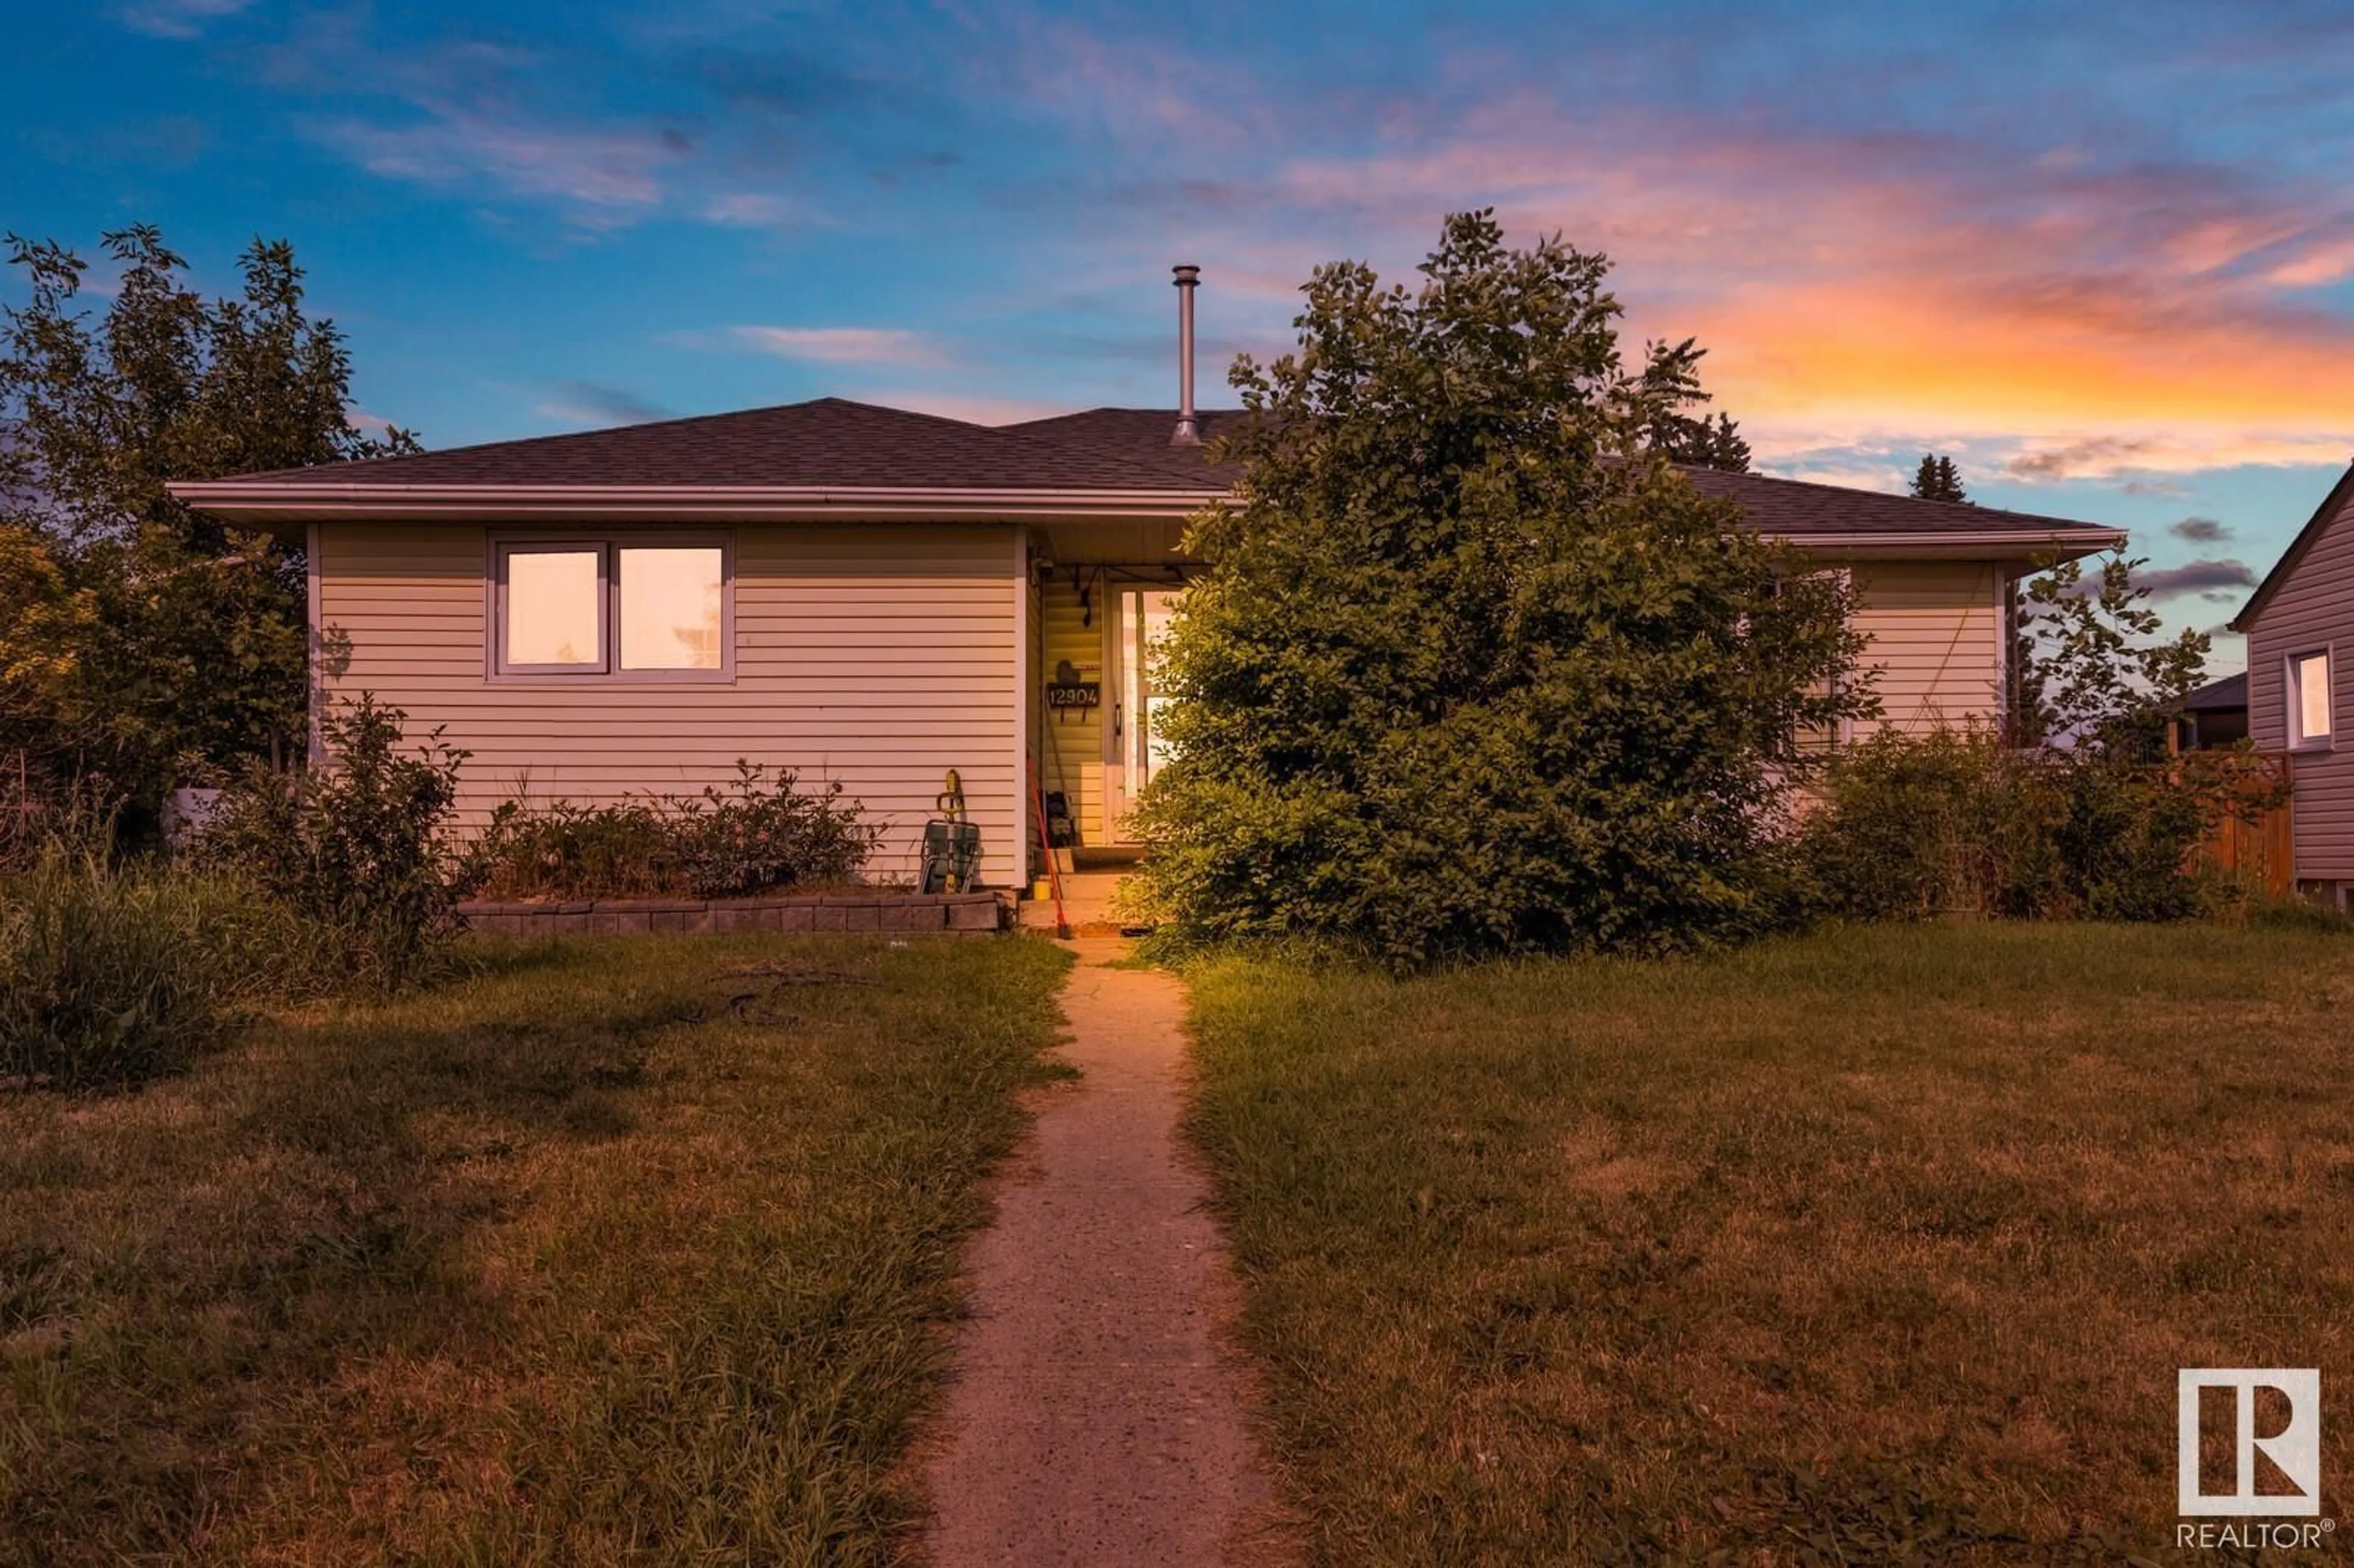 Frontside or backside of a home for 12904 87 ST NW, Edmonton Alberta T5E3E1